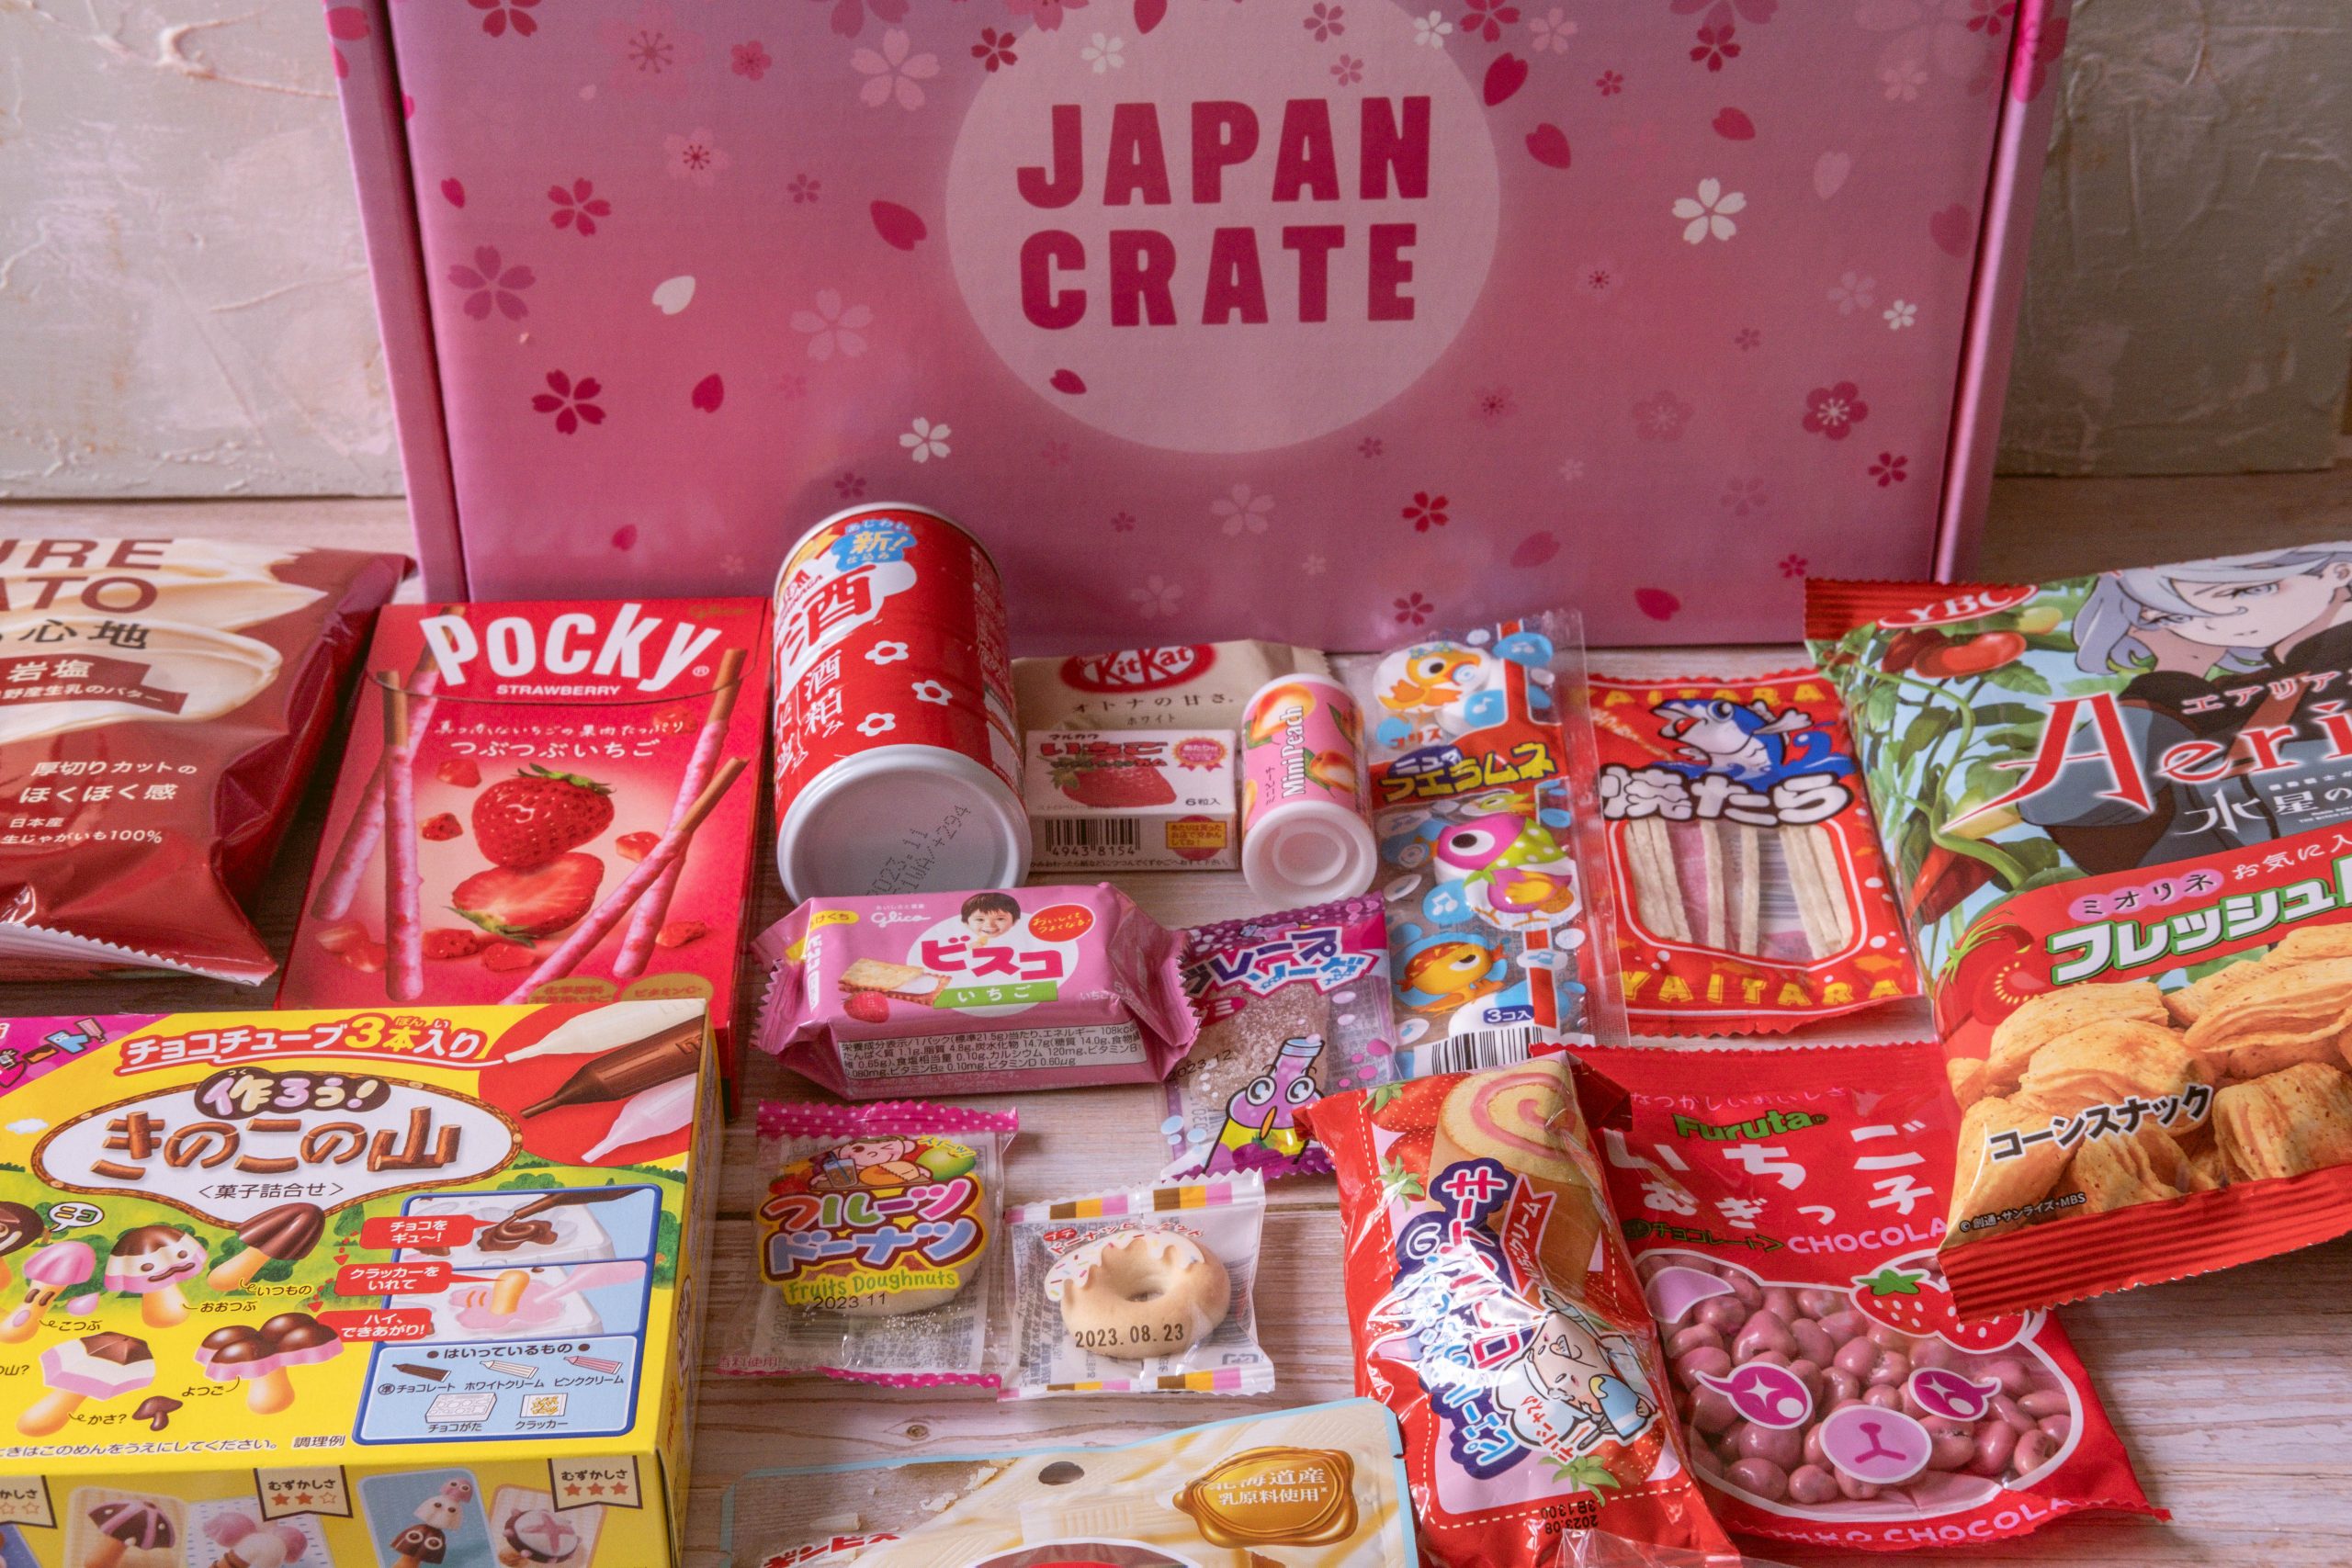 My Japan crate box with its contents